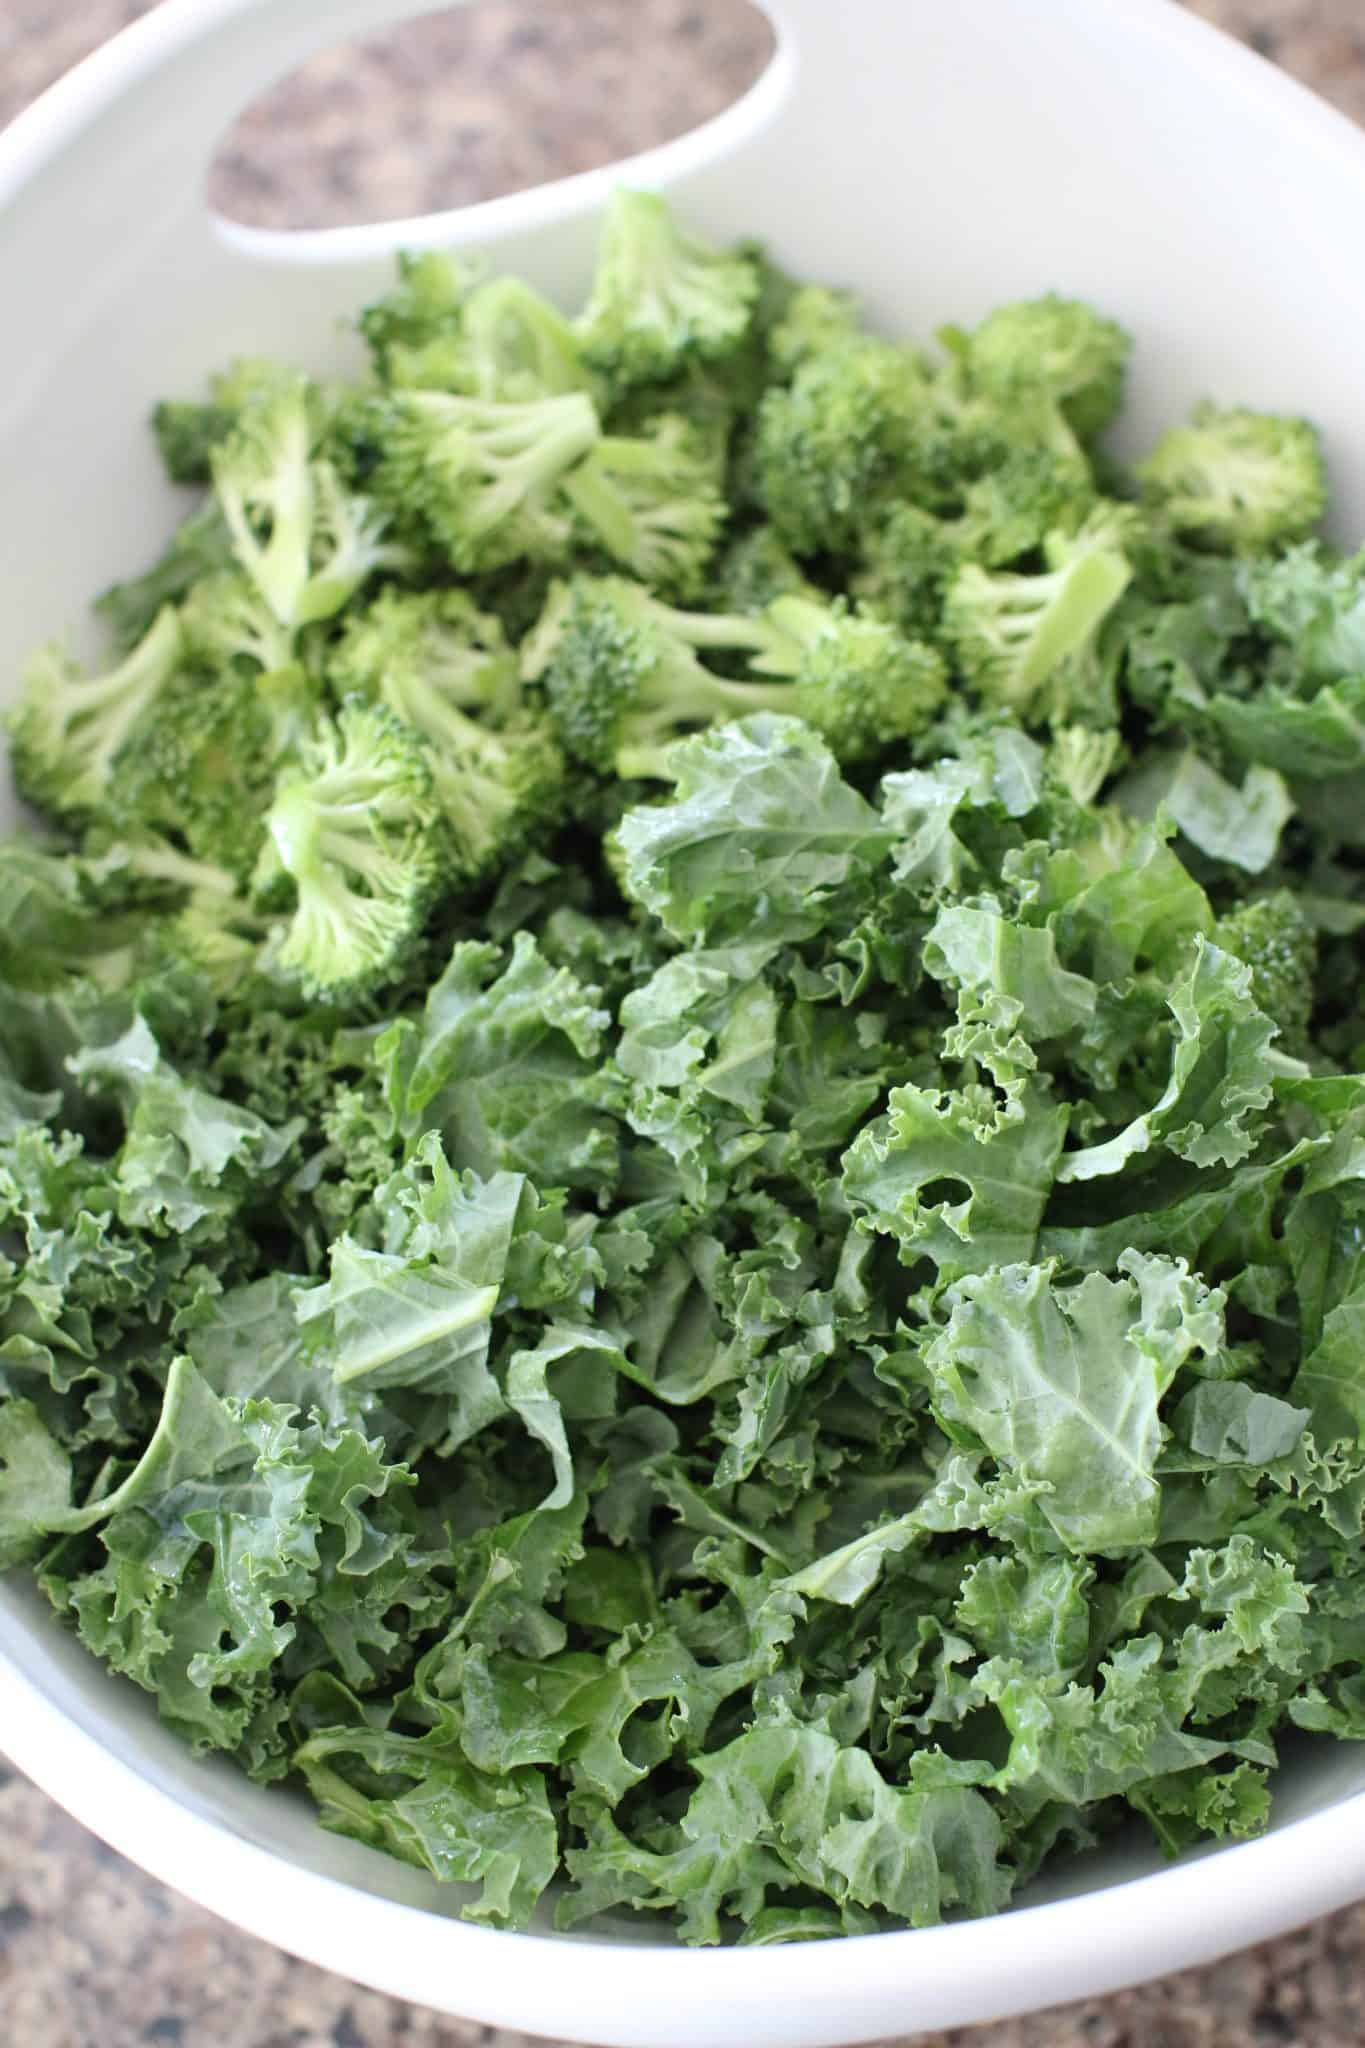 kale and broccoli shown in a large white bowl with handles.